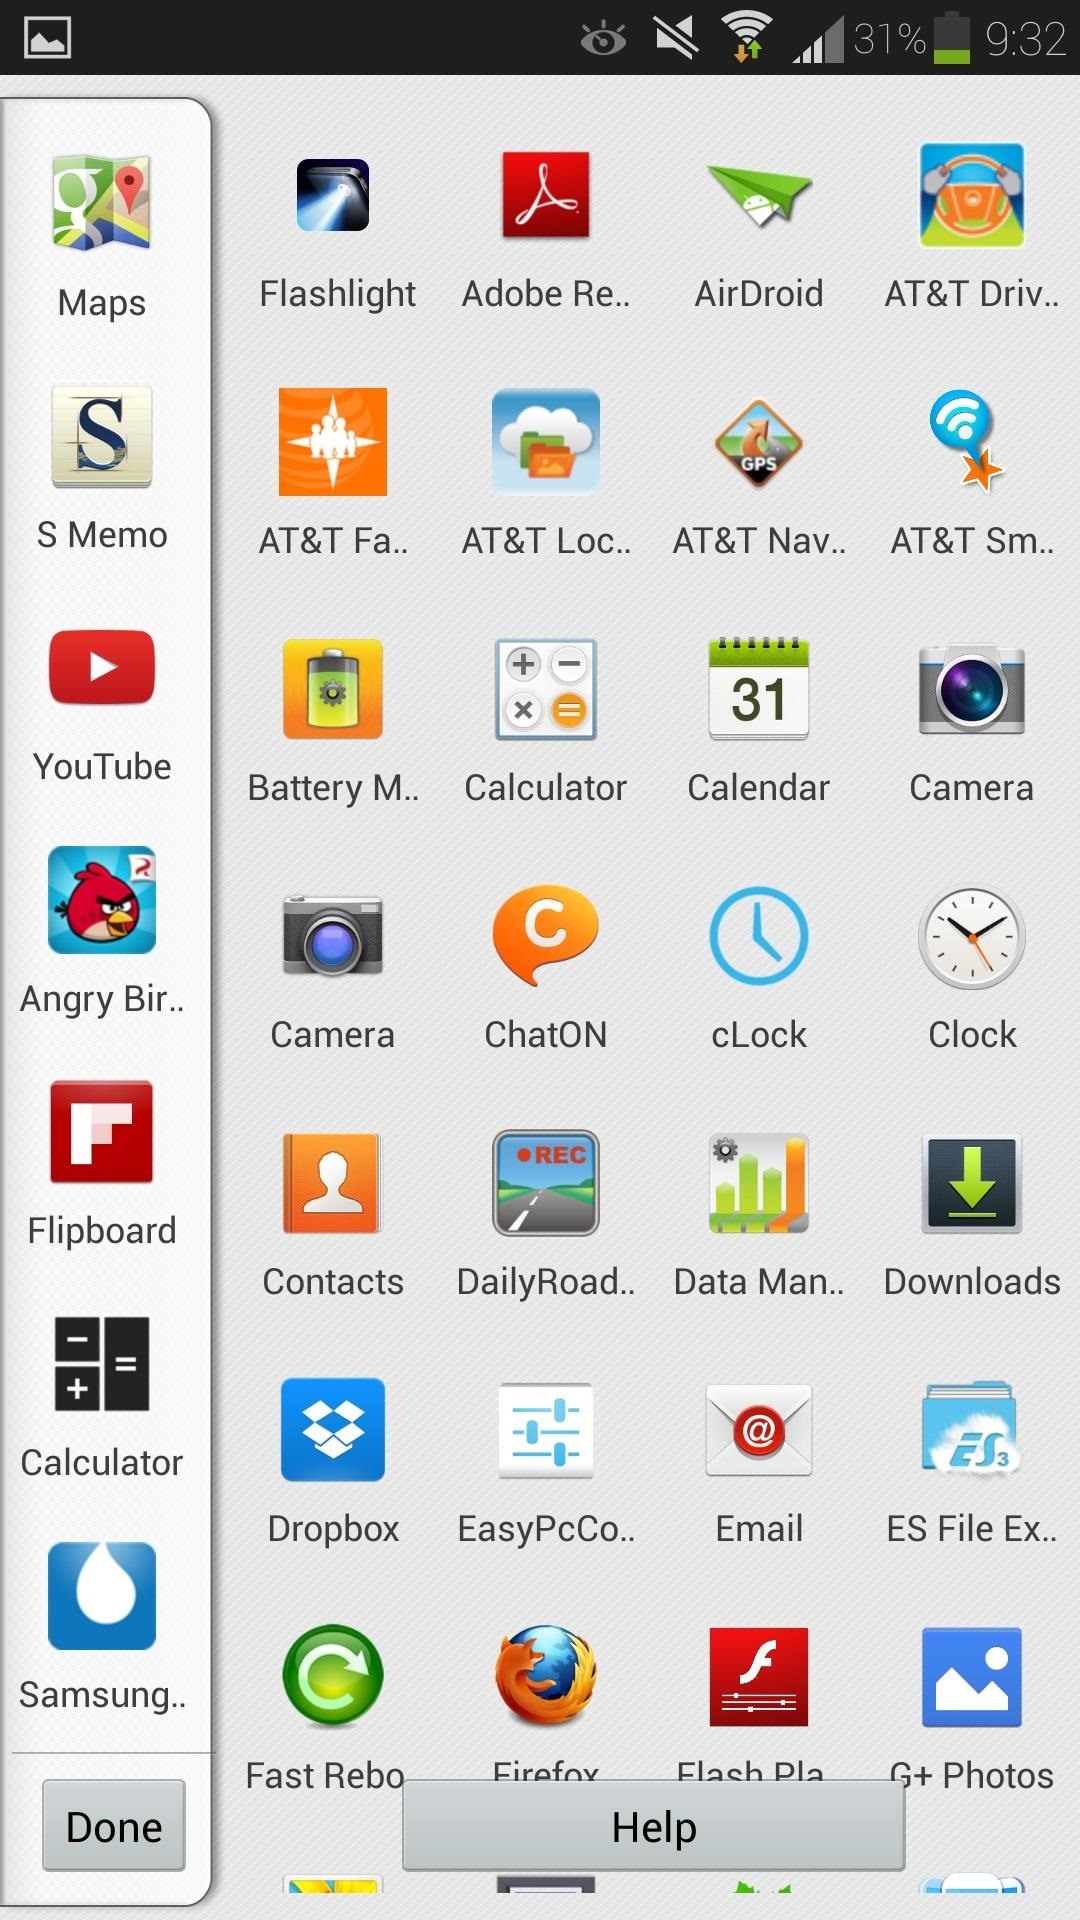 How to Enable Multi-Window View for Every Single App on Your Samsung Galaxy S4